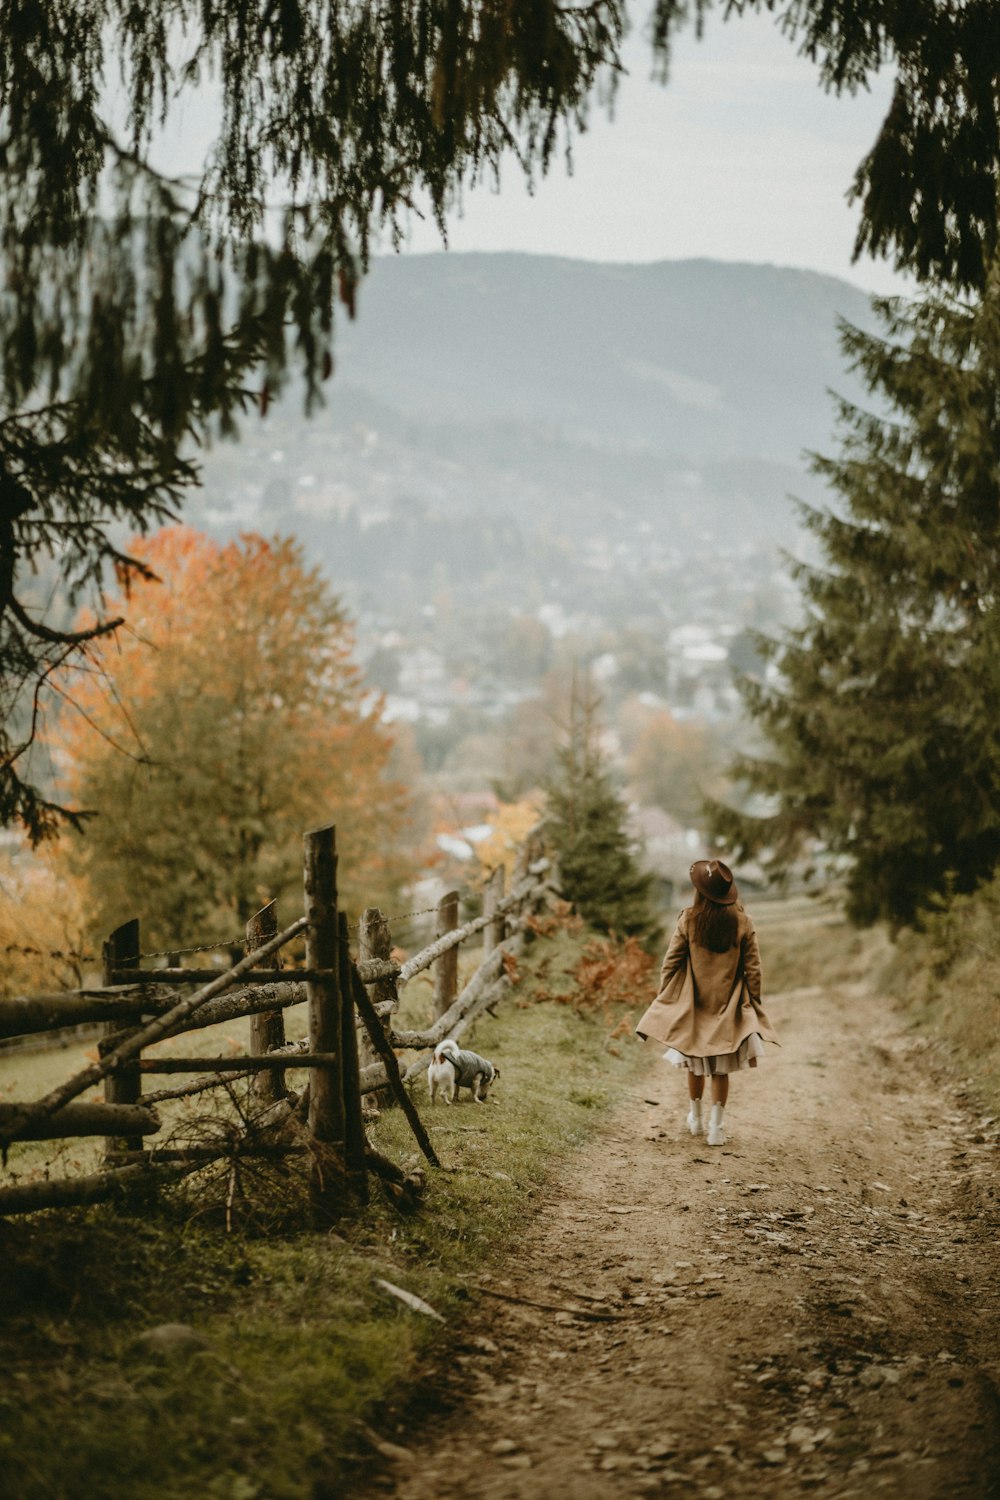 a person walking a dog on a dirt path in a forest